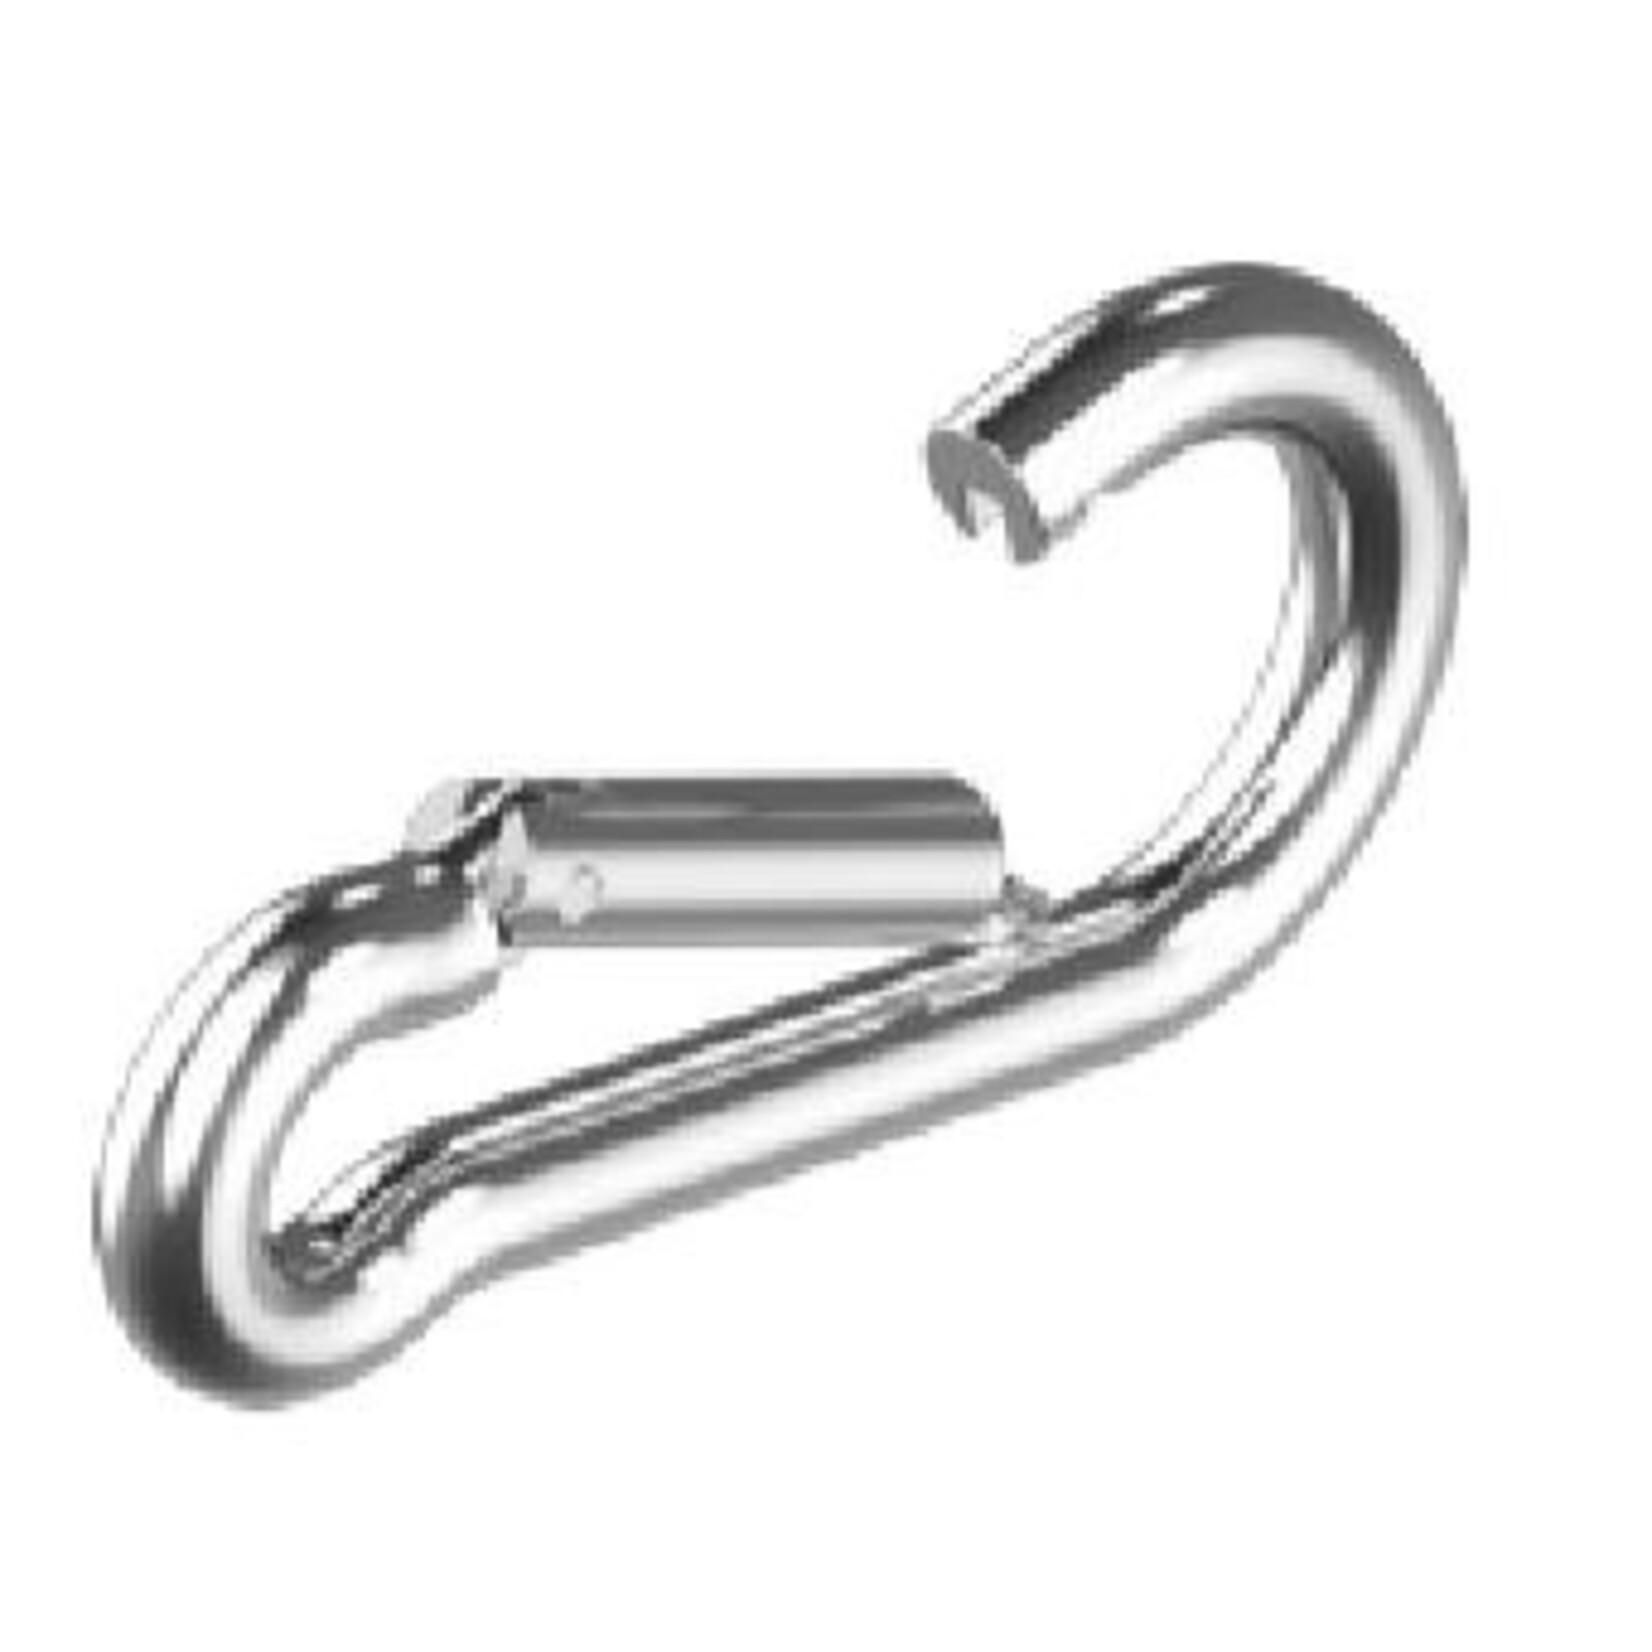 Snap hook stainless 10x100mm